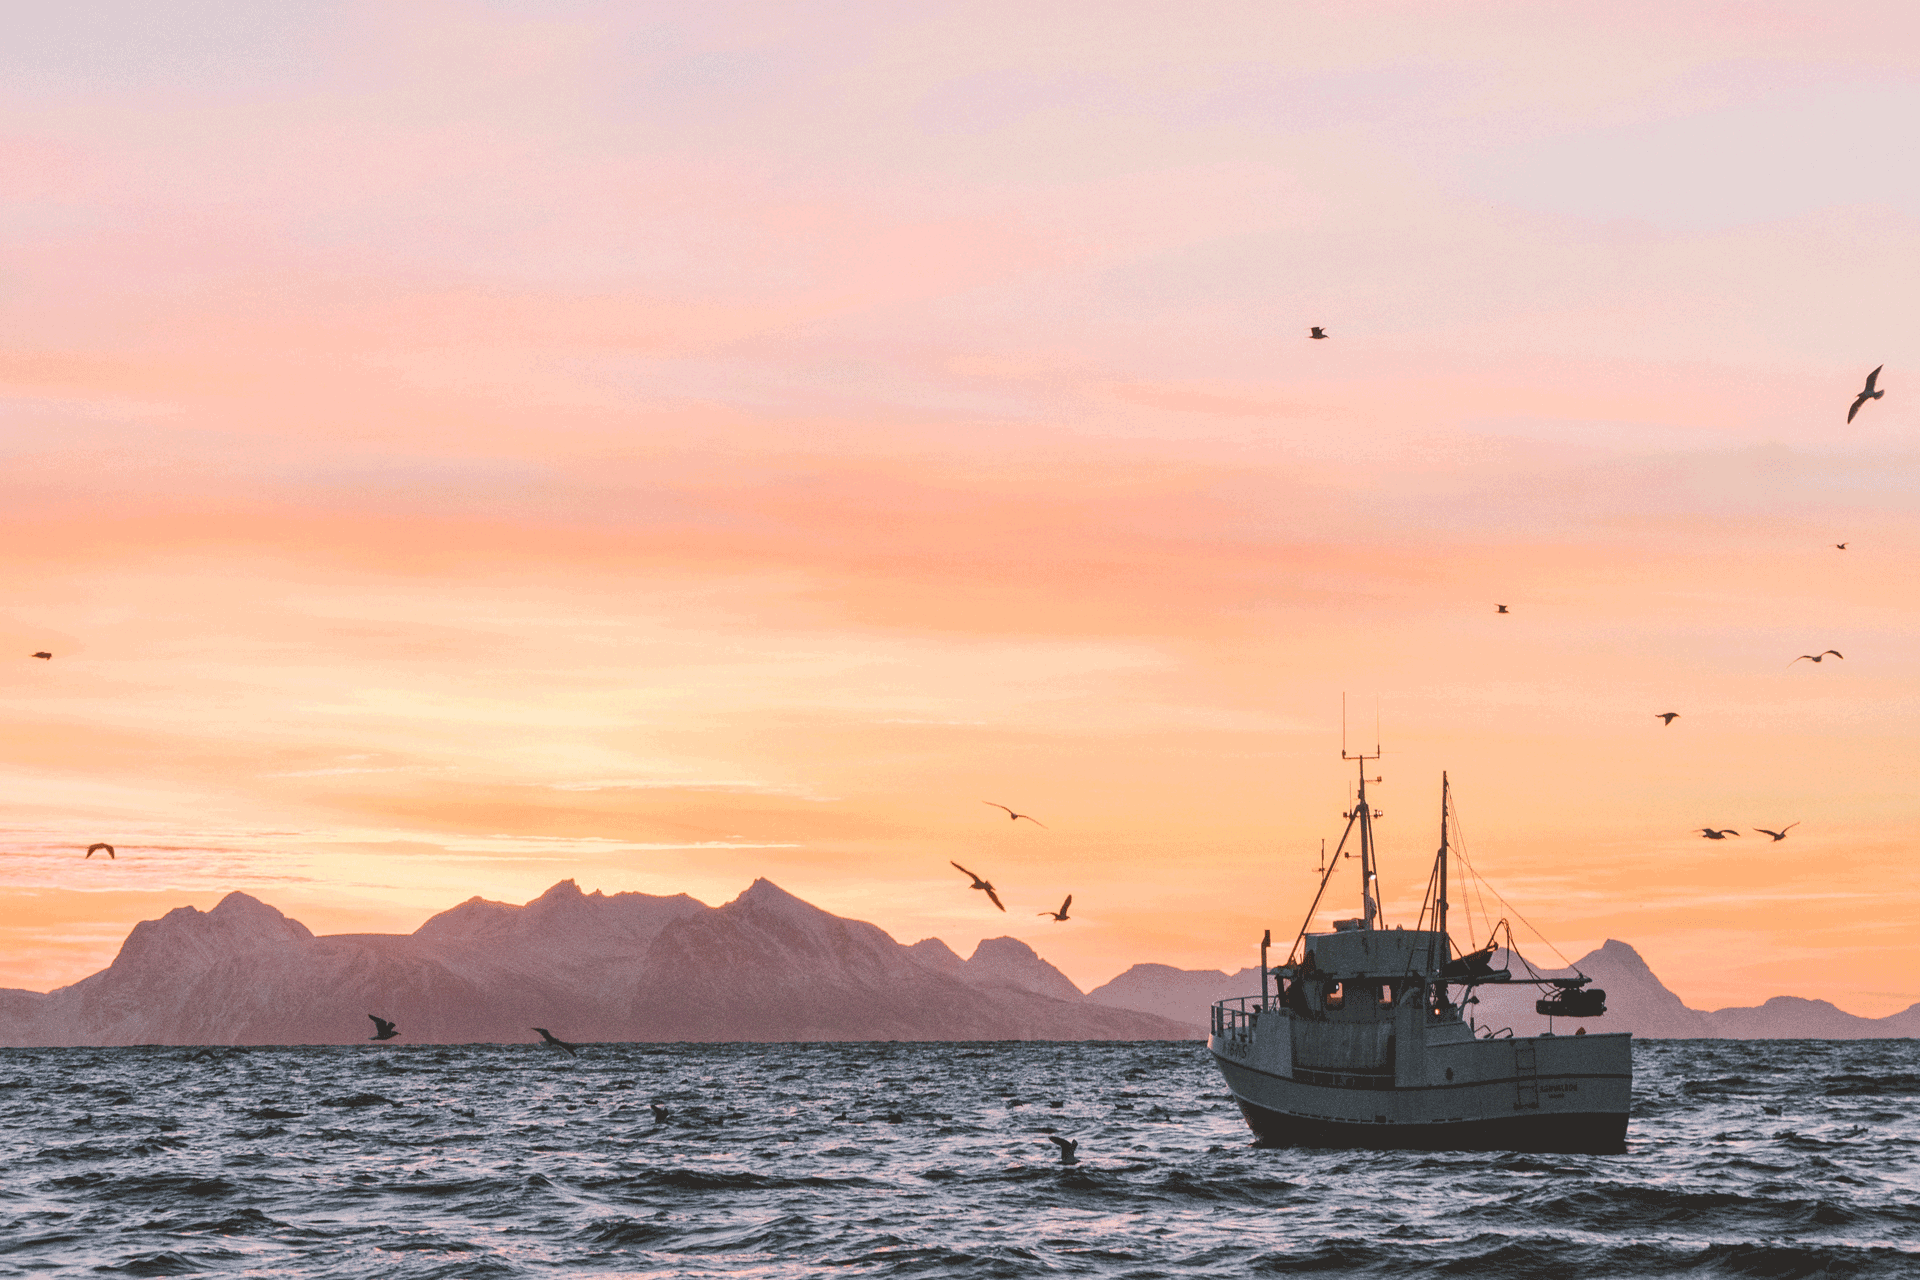 Fishing boat on a calm ocean at sunset.